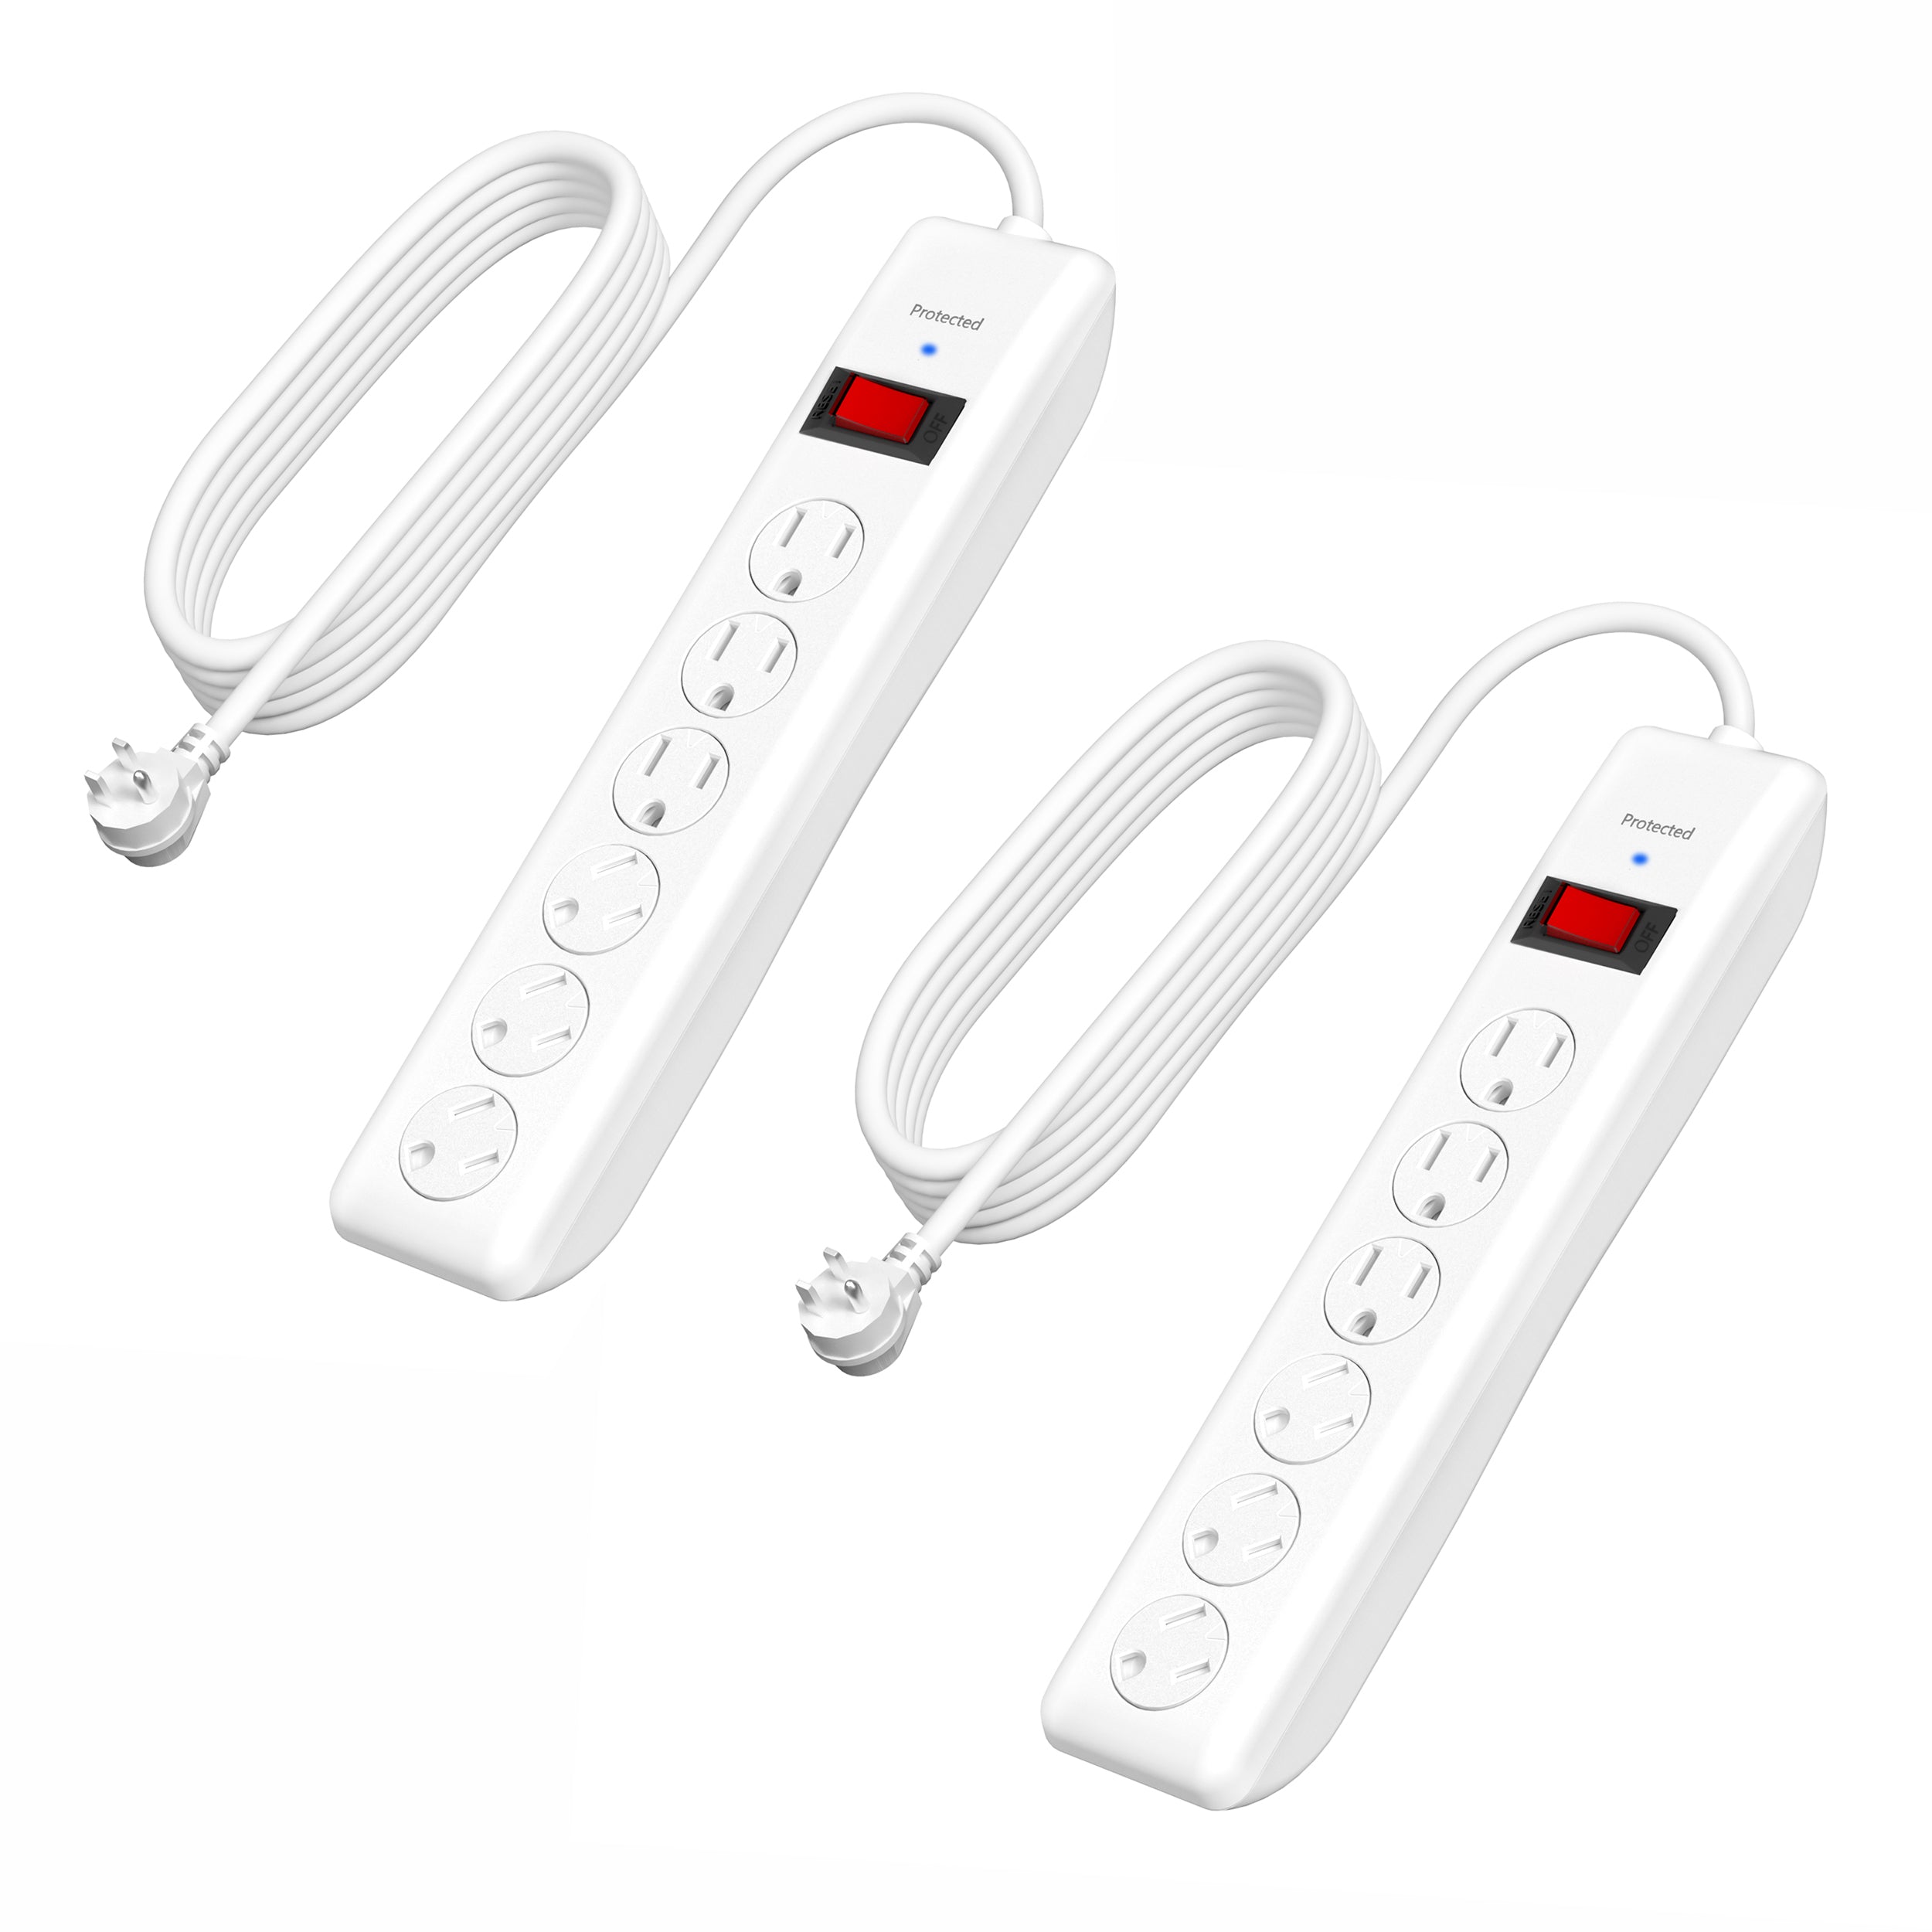 6-Outlet Power Strip Surge Protector 2-Pack with 10-Foot Extension Cord Bn-link